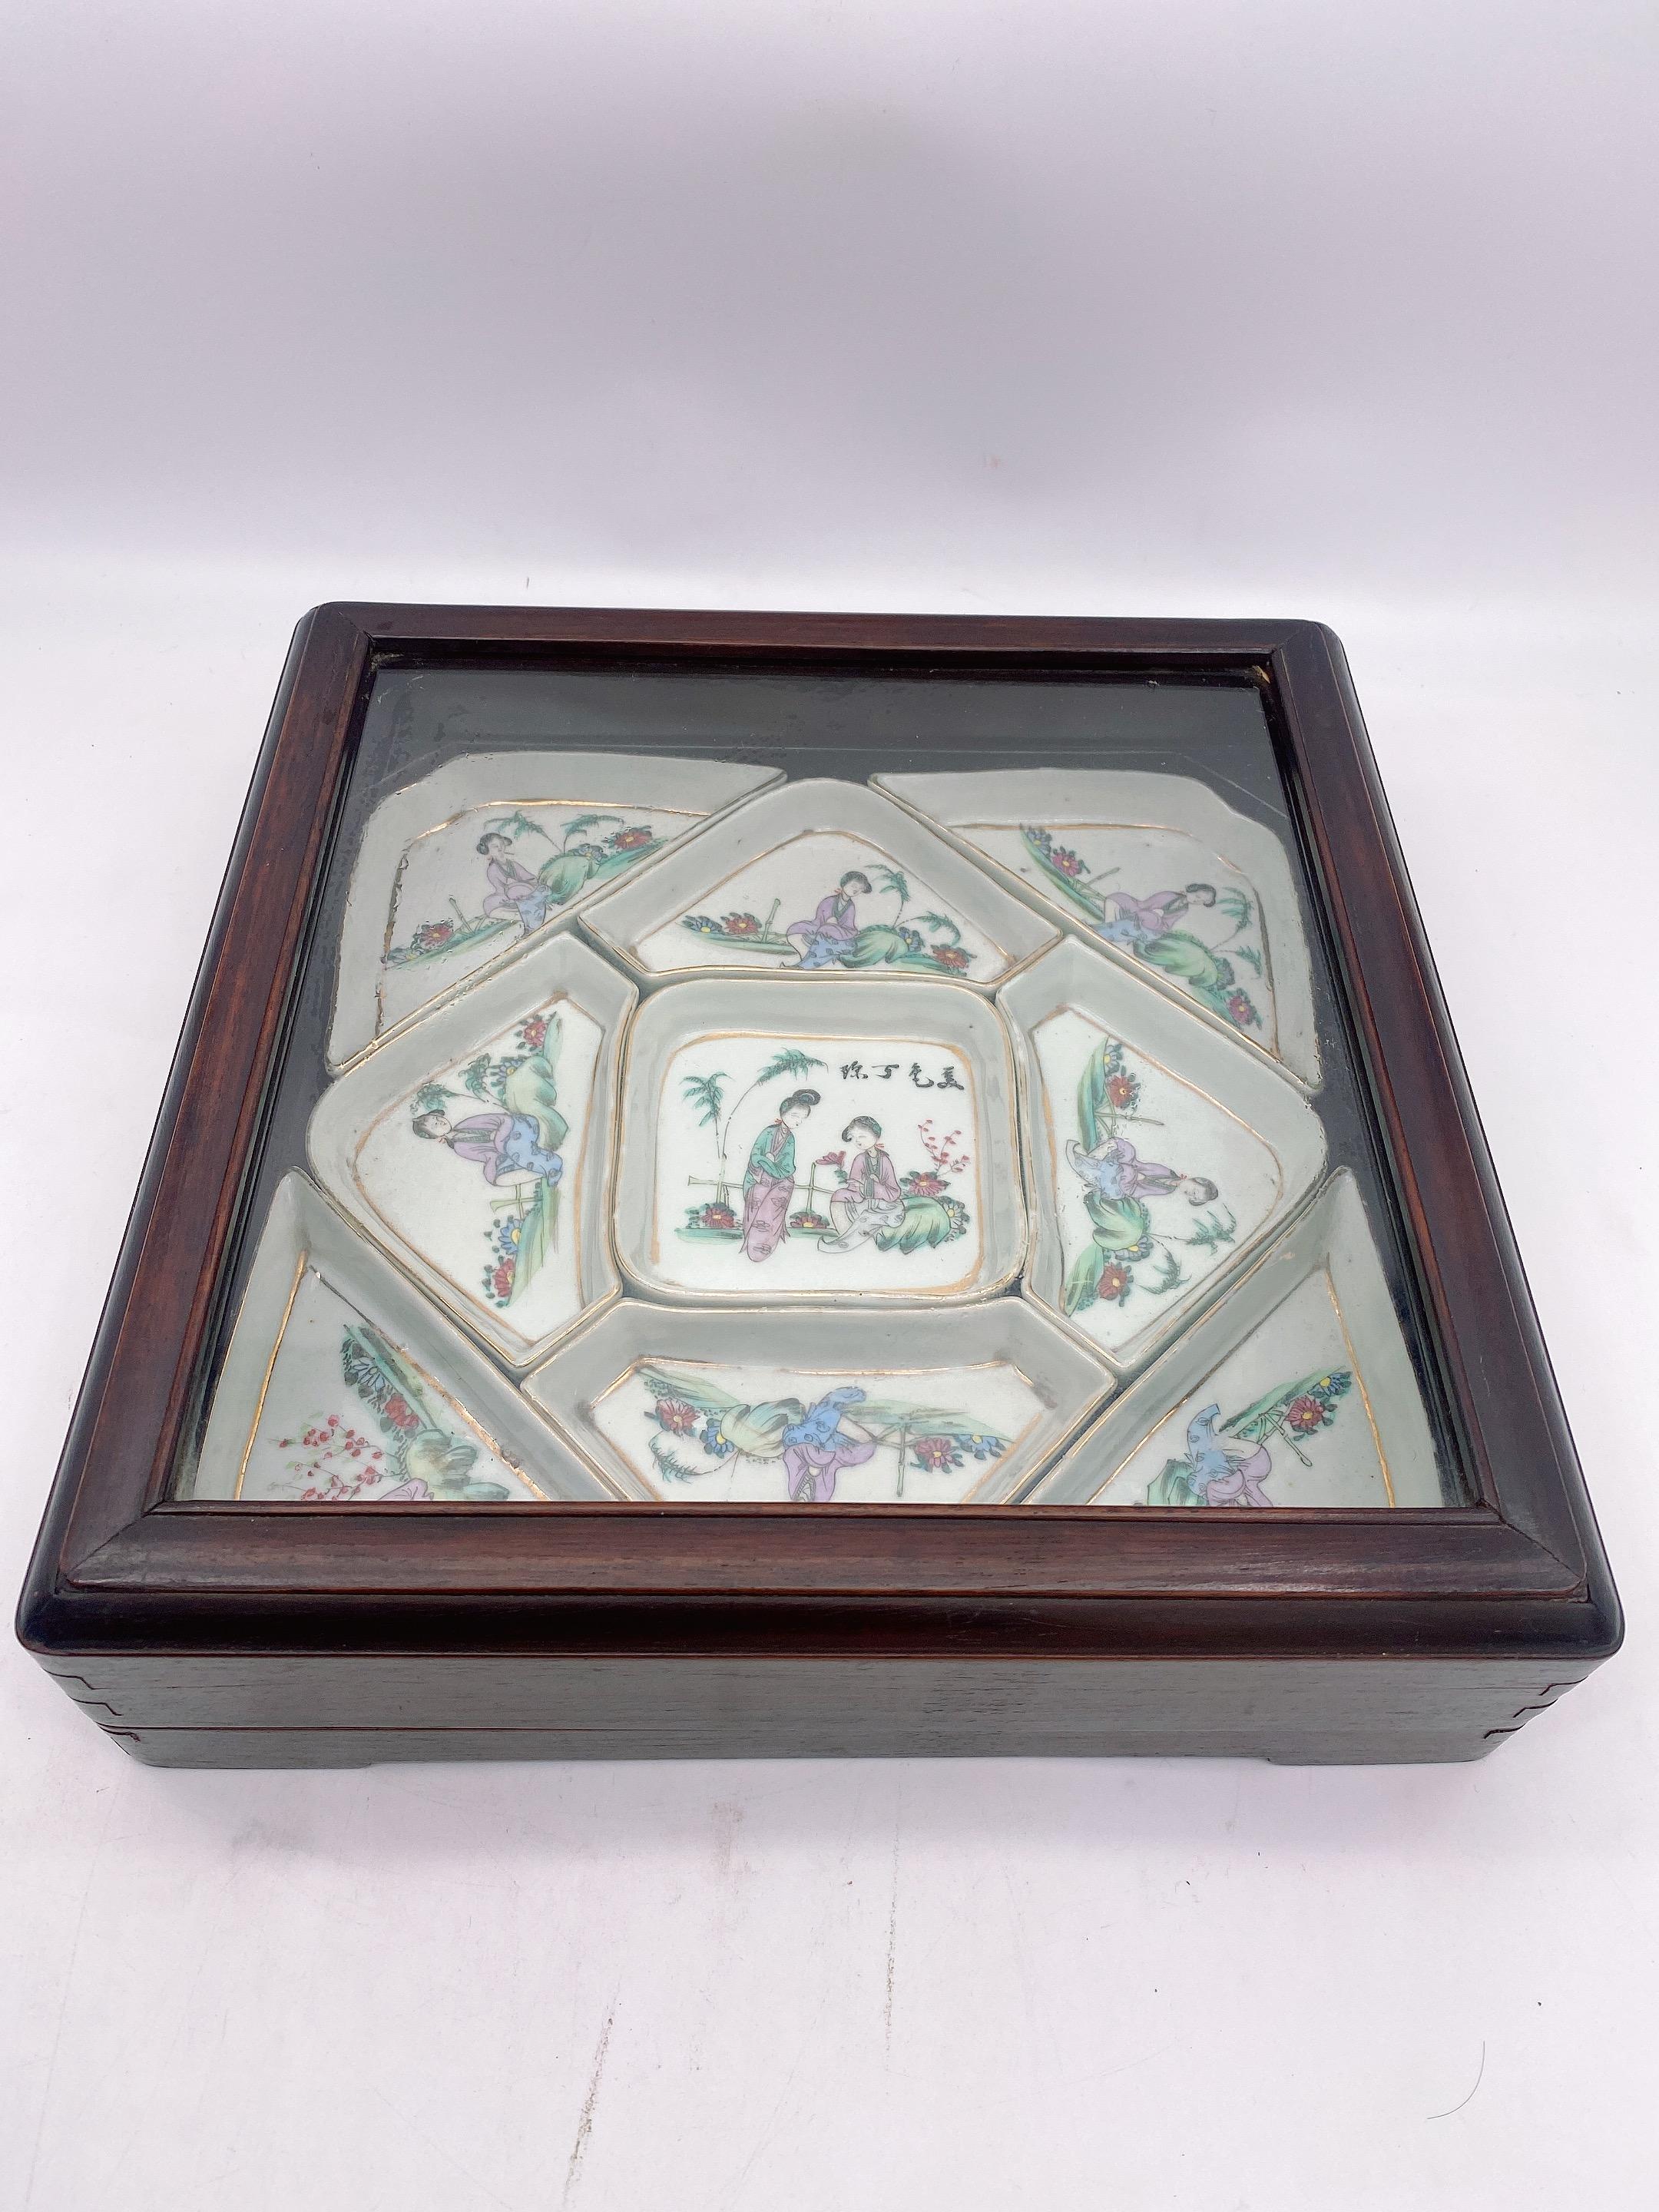 Qing dynasty an antique important Chinese famille rose porcelain 9 pieces sweetmeat dishes set with very beautiful box, hand painted. Excellent condition, every piece with meirenruyu in chinese, the middle square piece with measures: 10.5” x 10.5 x